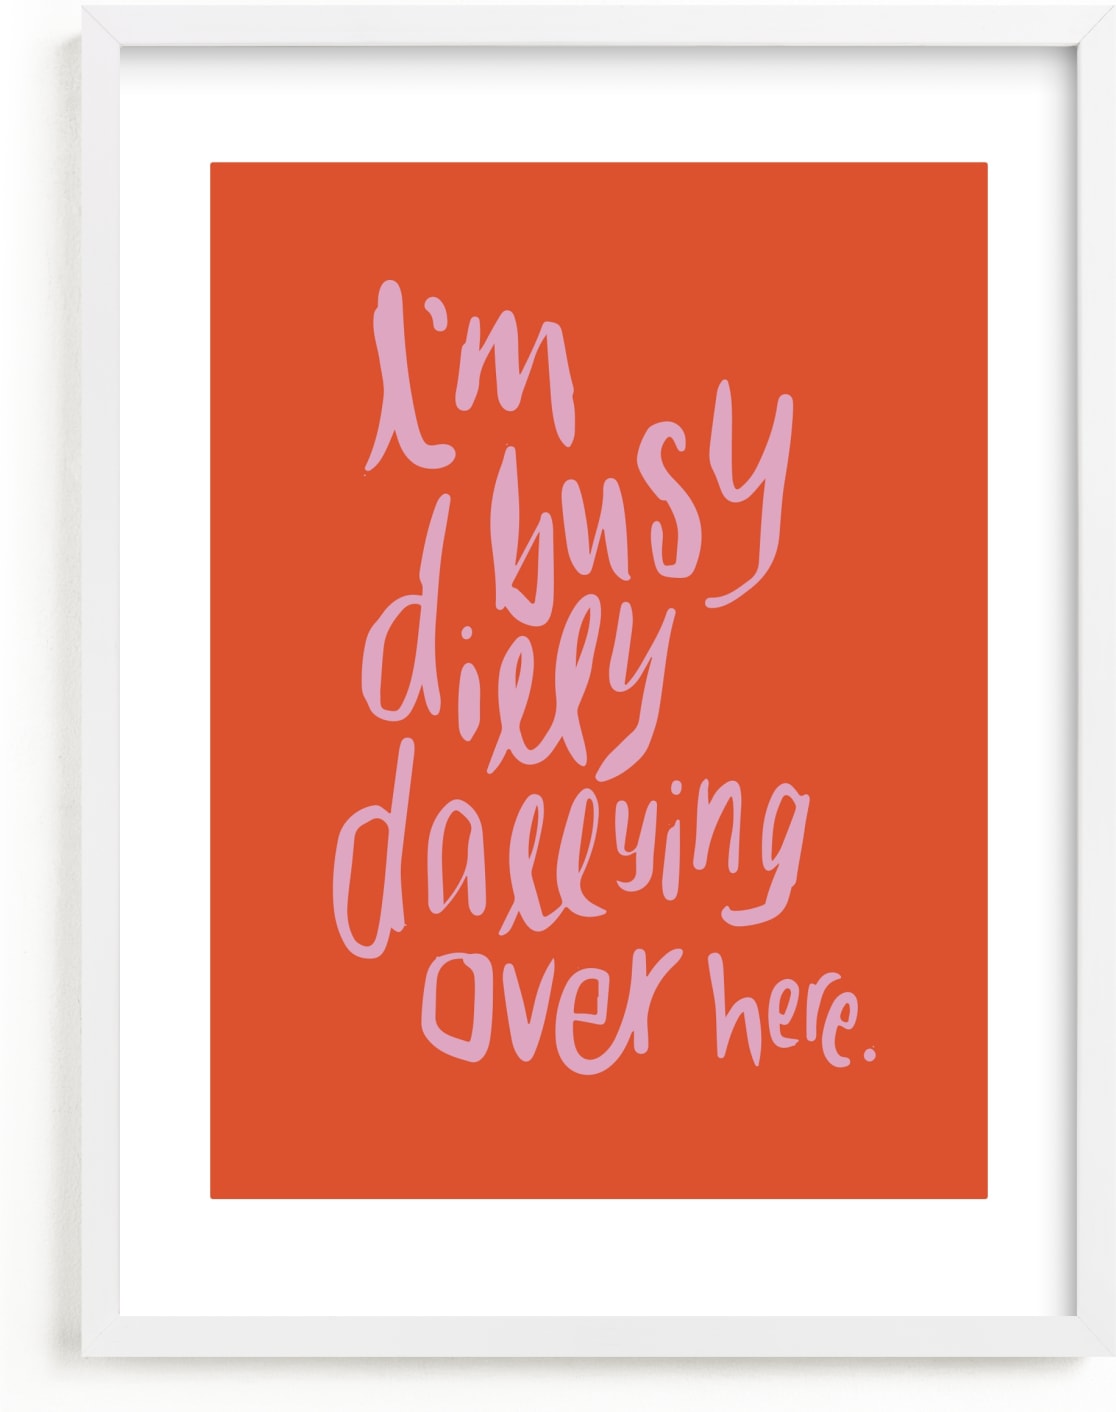 This is a orange kids wall art by Inkblot Design called Dillydally all day.